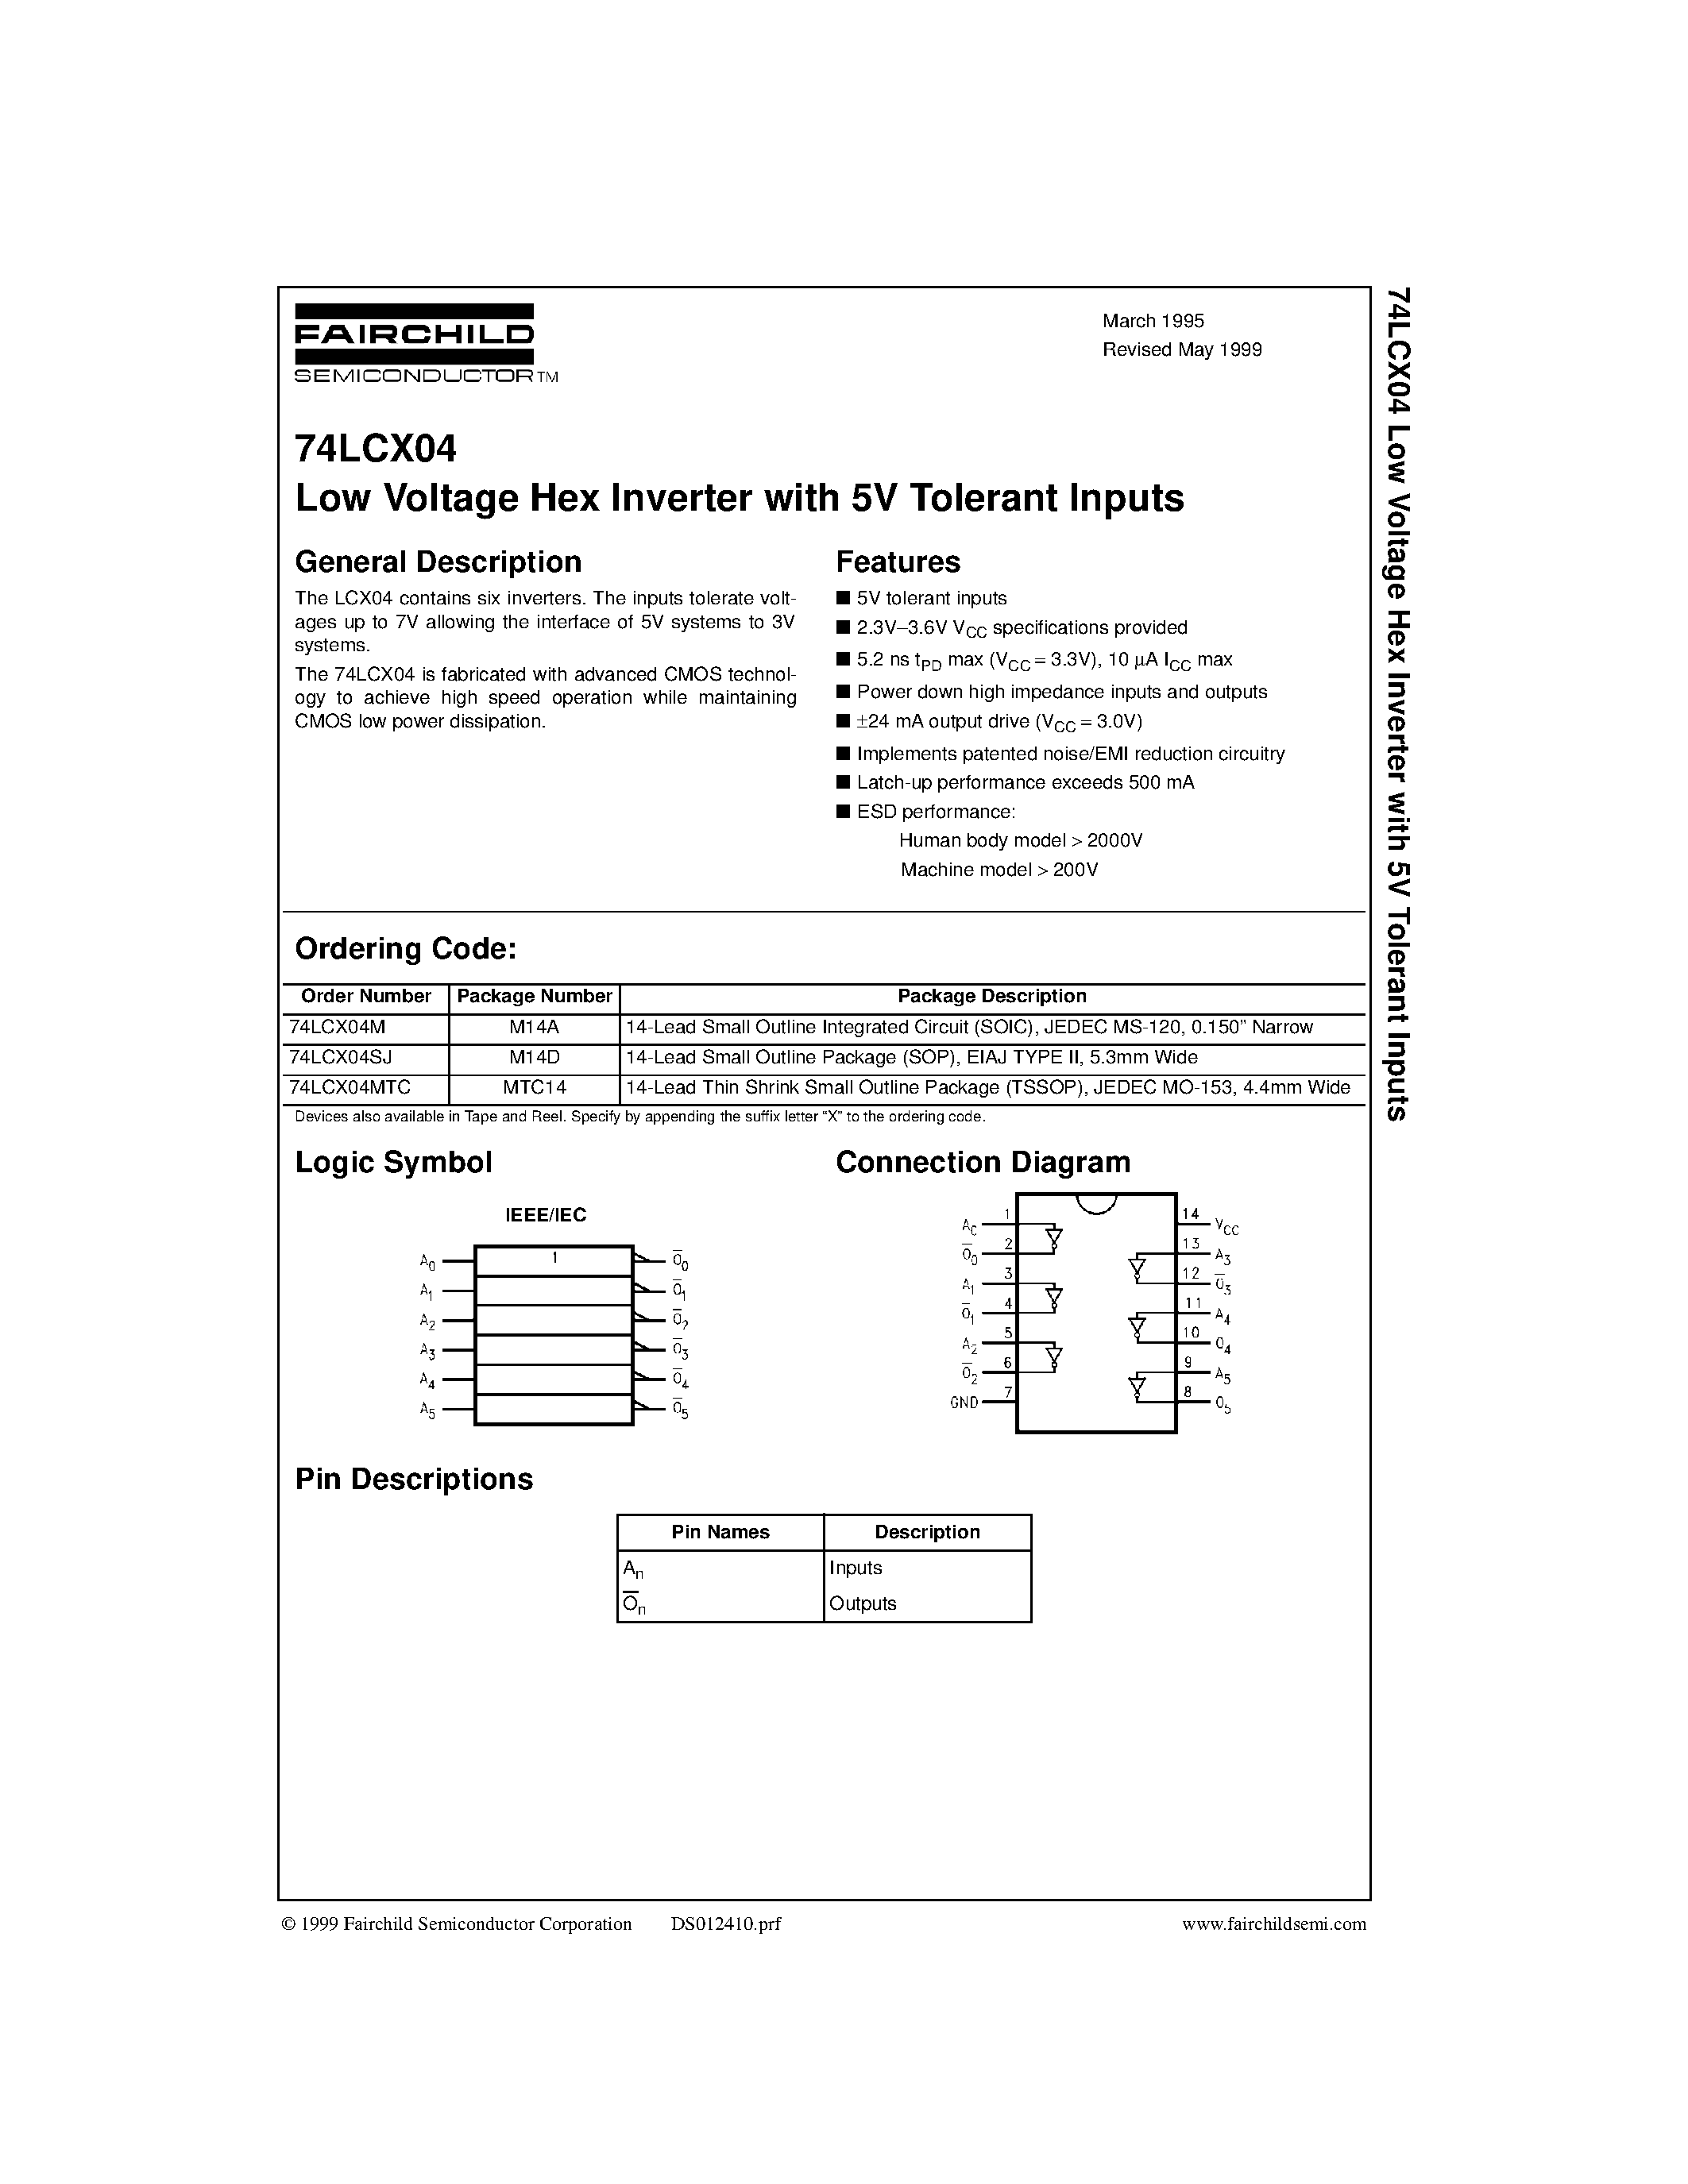 Datasheet 74LCX04 - Low Voltage Hex Inverter with 5V Tolerant Inputs page 1